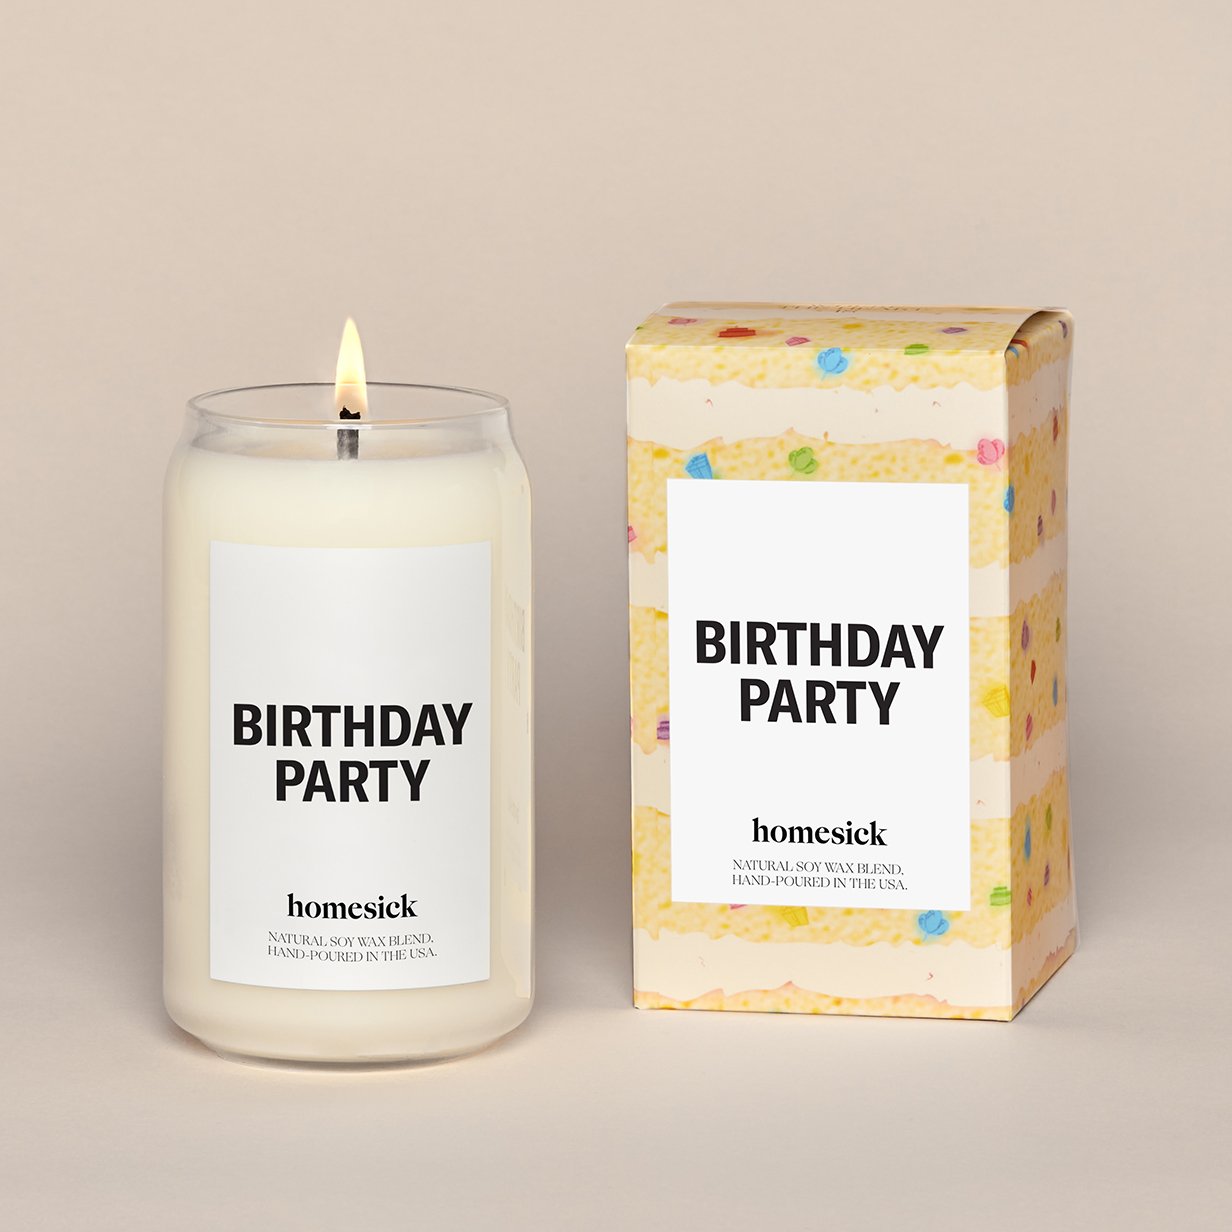 Homesick Homesick Birthday Party Candle available at The Good Life Boutique